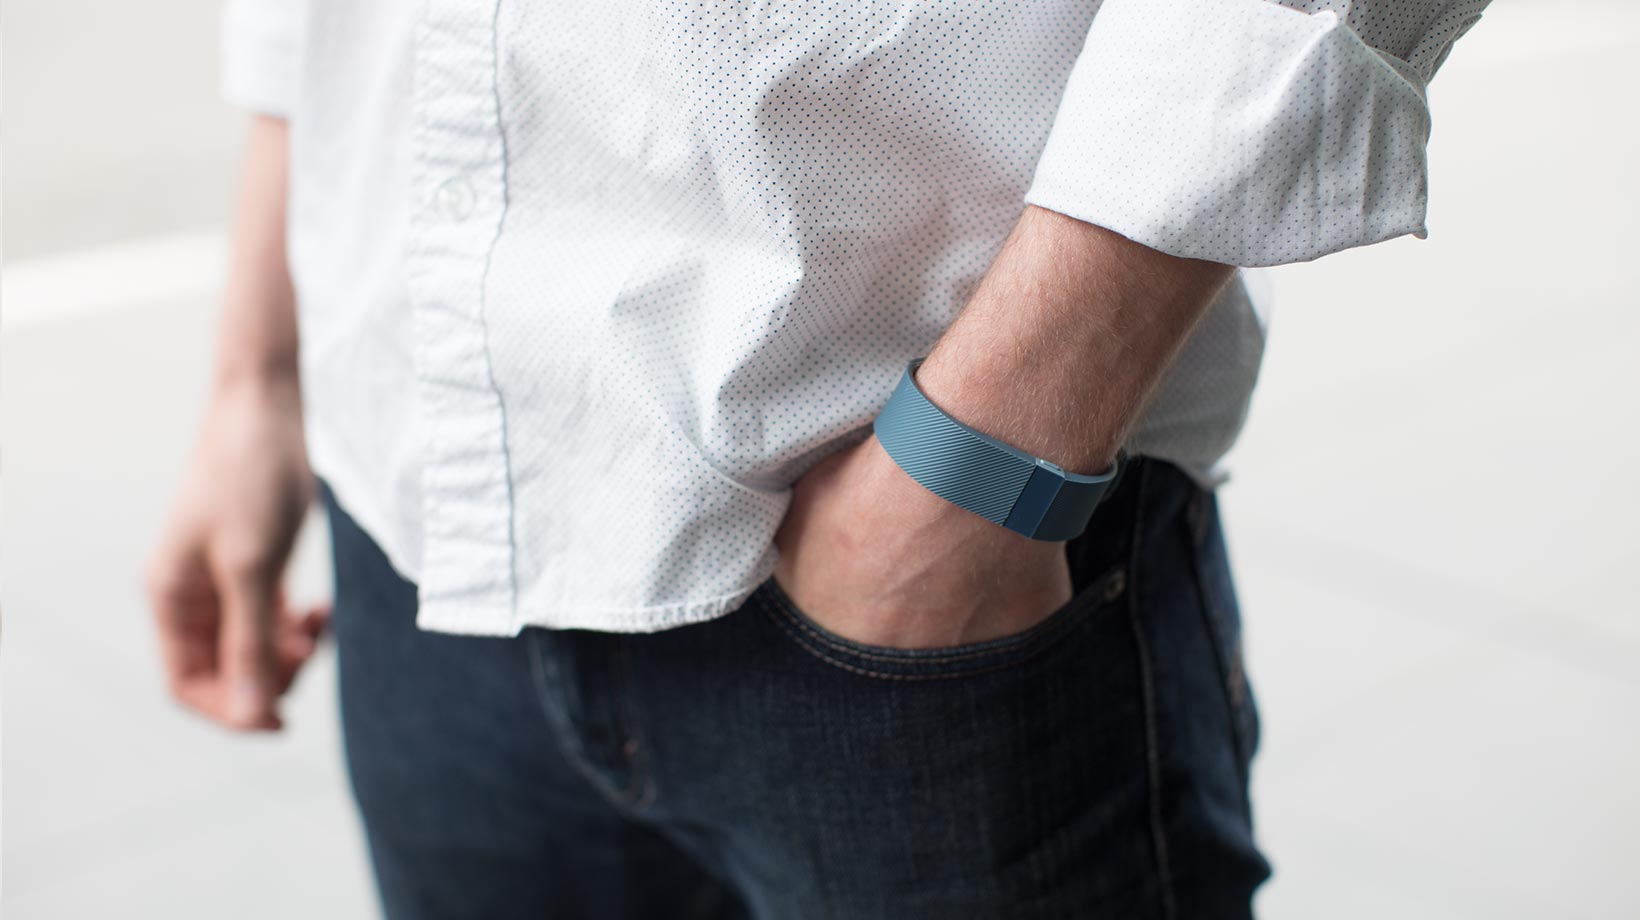 The same Fitbit model reported to have saved a man's life in the emergency room. [photo: fitbit.com]